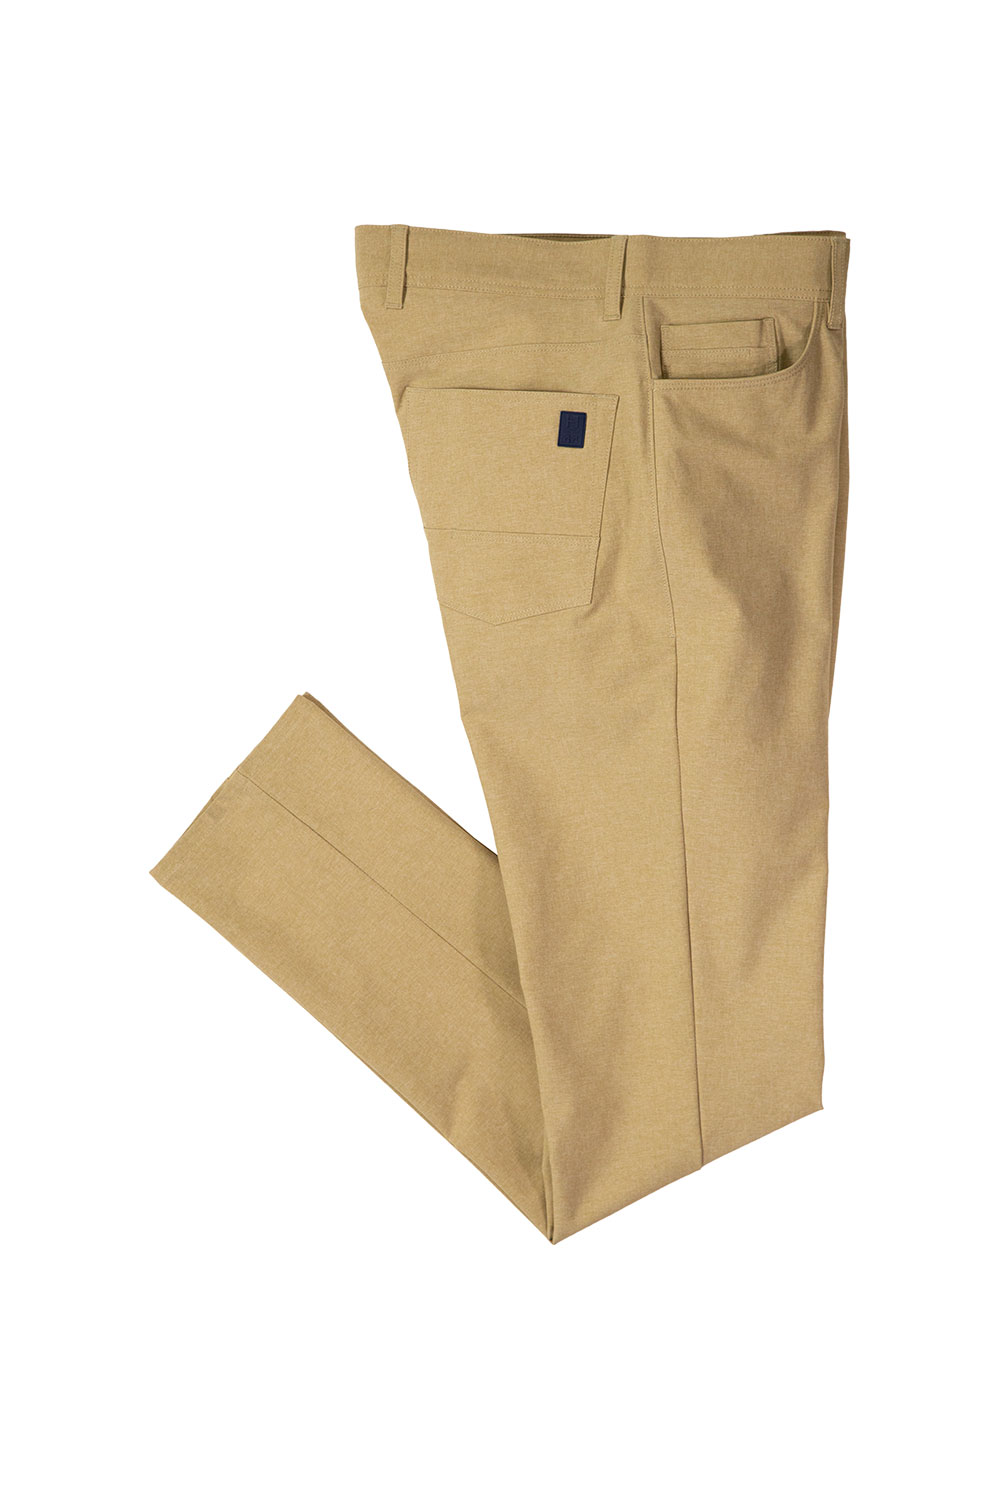 WP2067 Waypoint Sport 5-Pocket Pant color Dusty